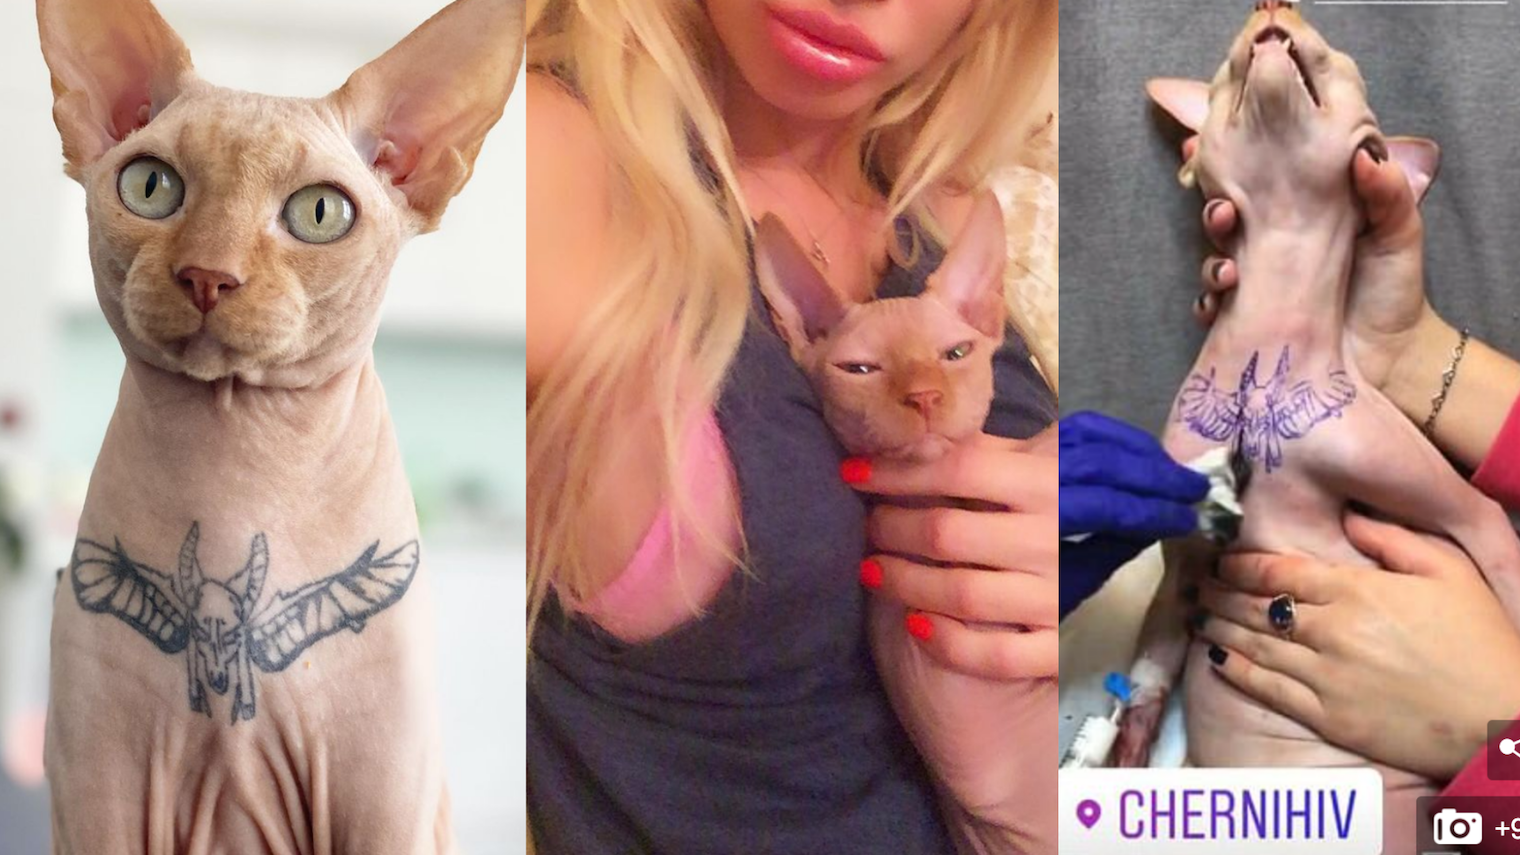 Pet owner sparks fierce debate after putting tattoo stickers on hairless cat   Daily Star